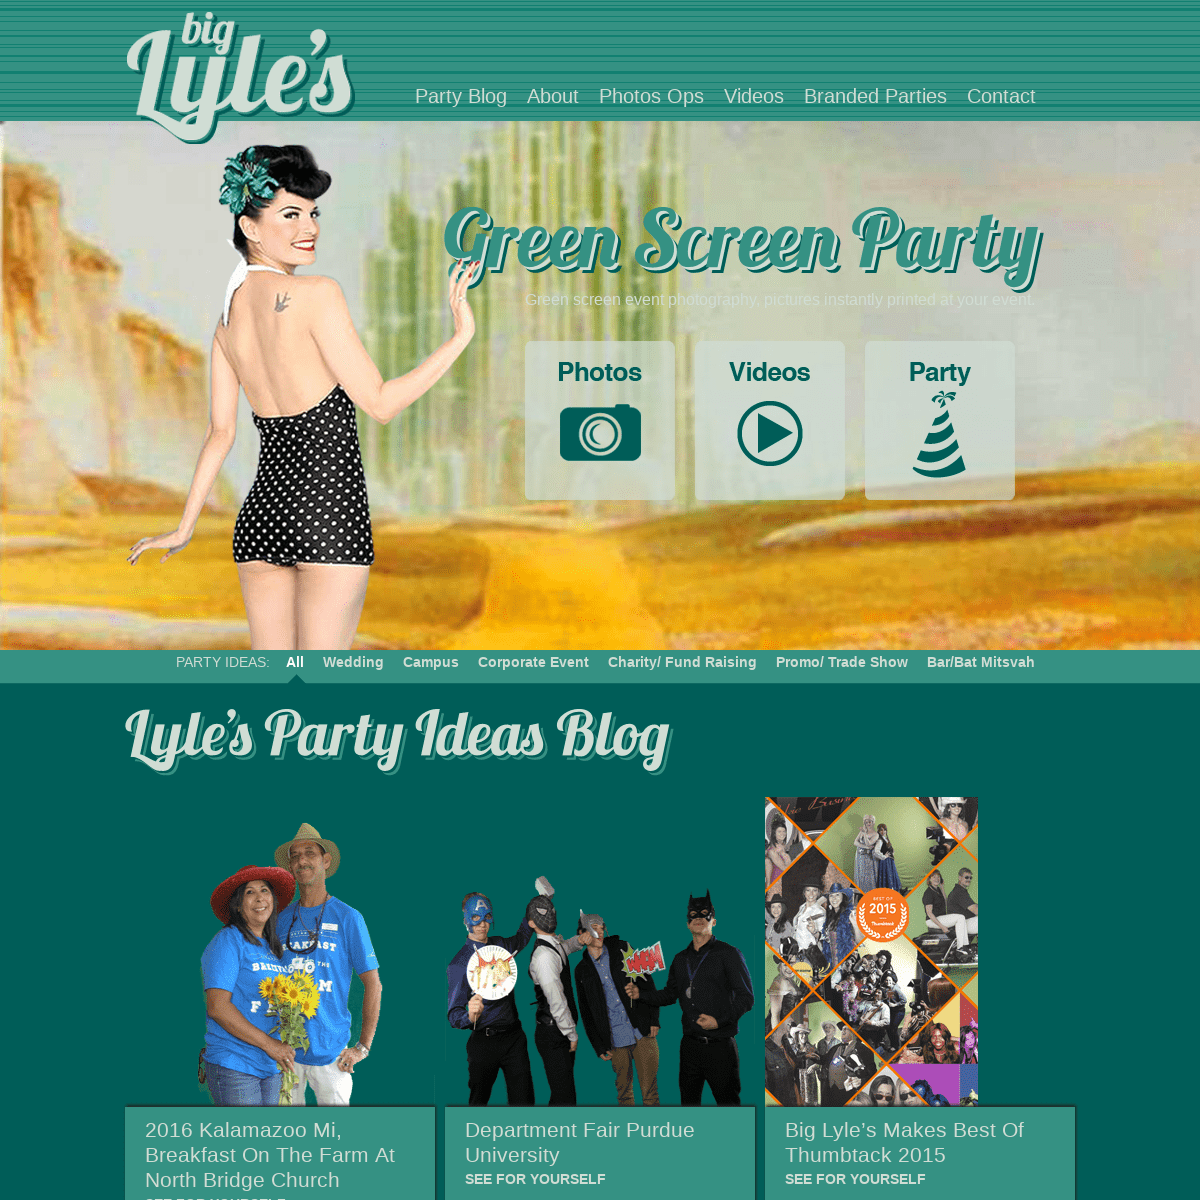 A complete backup of partywithlyle.com